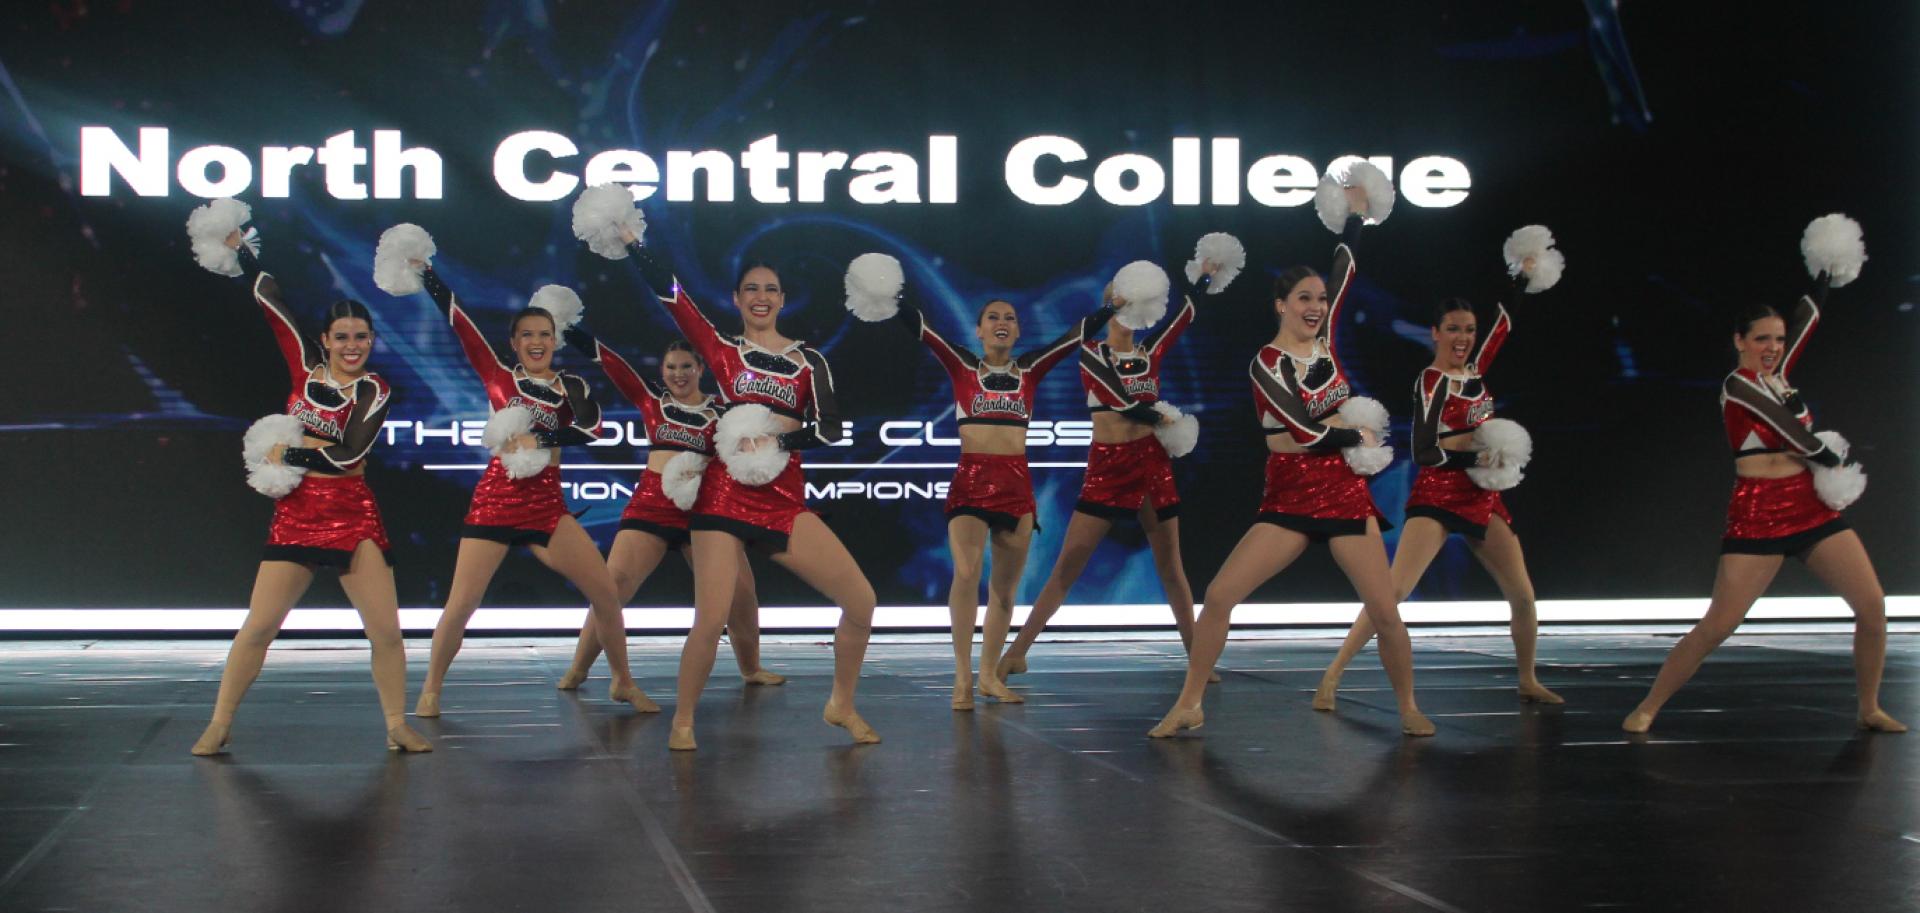 The North Central College dance team performing.